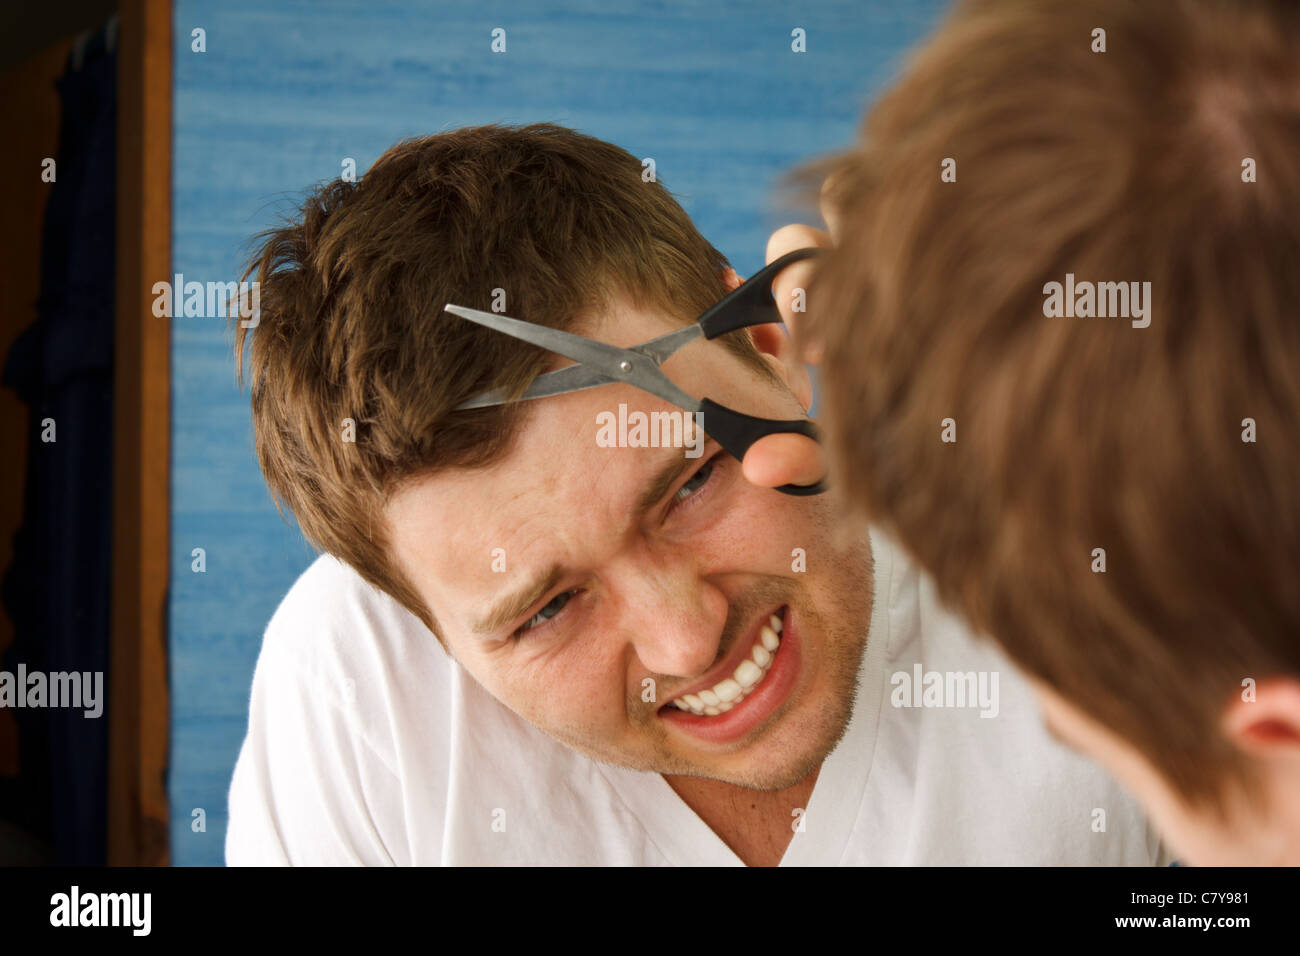 Young man preparing in mirror to cut hair himself with nervous expression Stock Photo